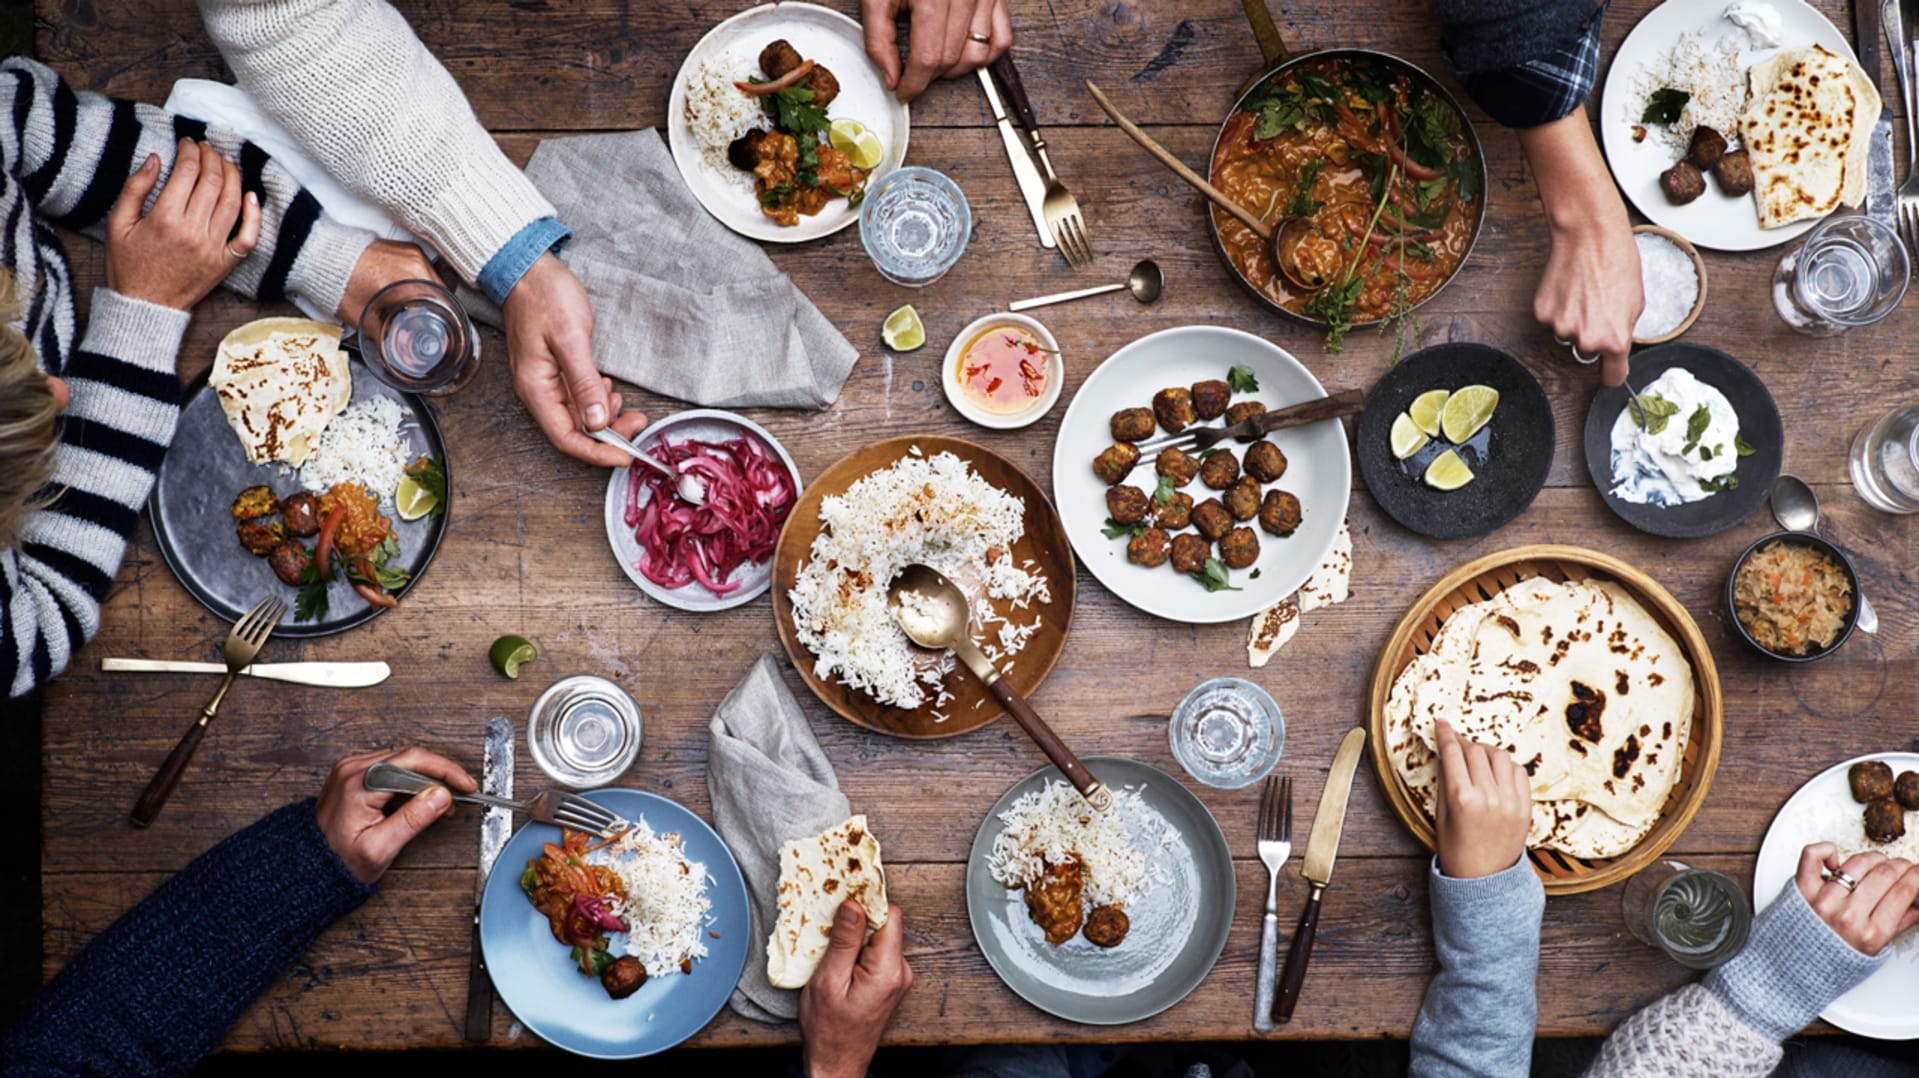 Ikea is now the world’s 6th largest food chain, and it’s testing delivery to your door